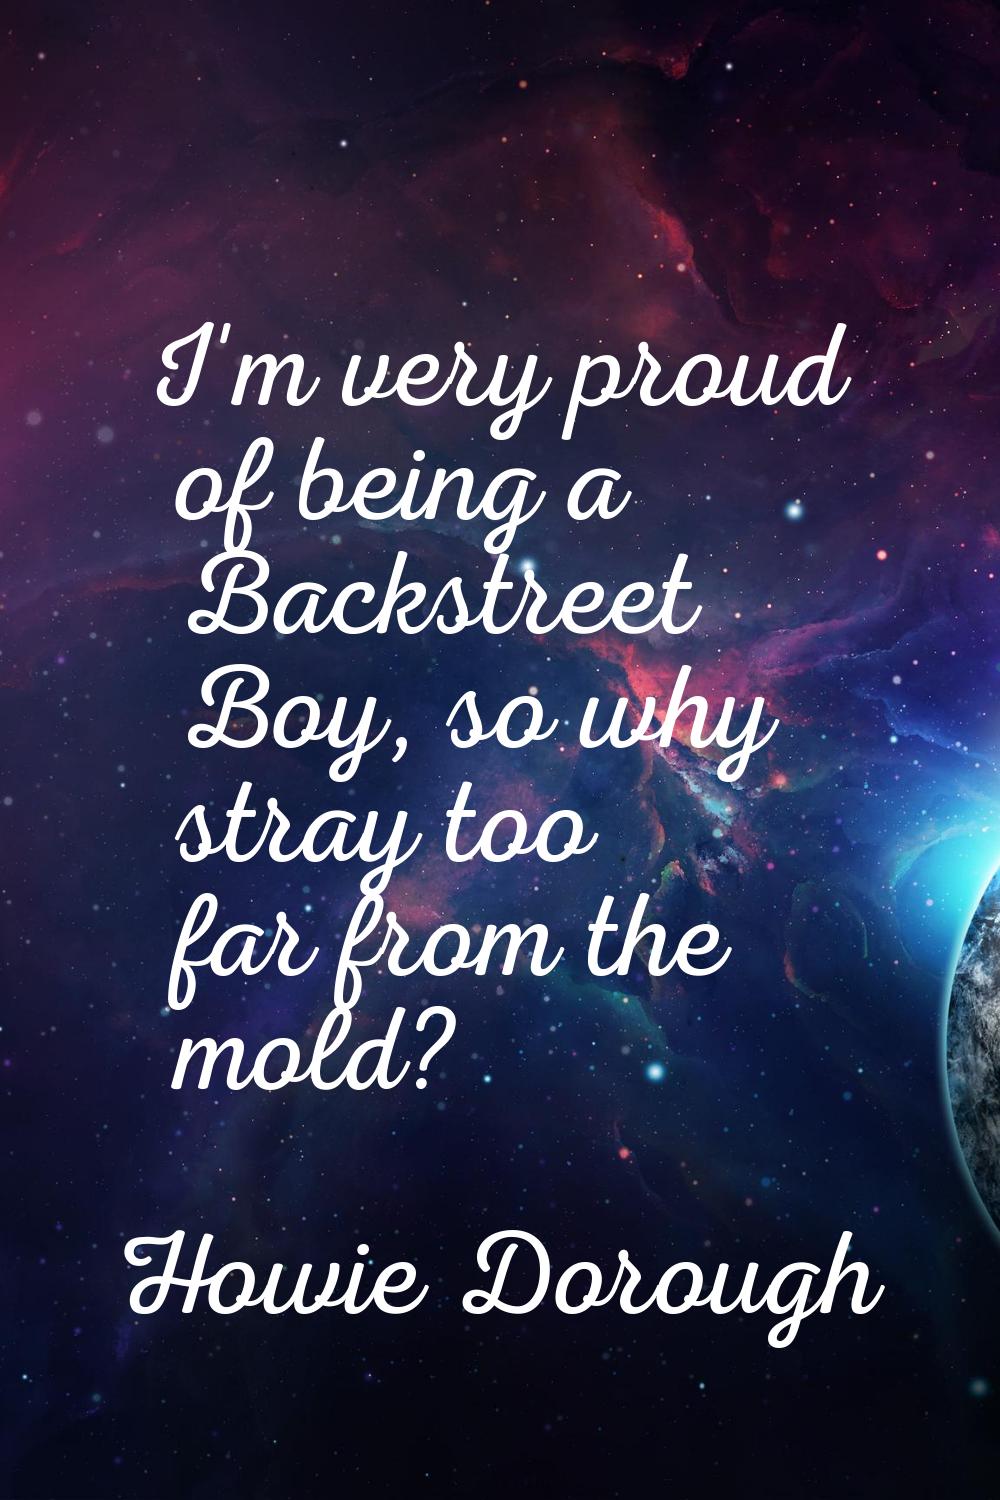 I'm very proud of being a Backstreet Boy, so why stray too far from the mold?